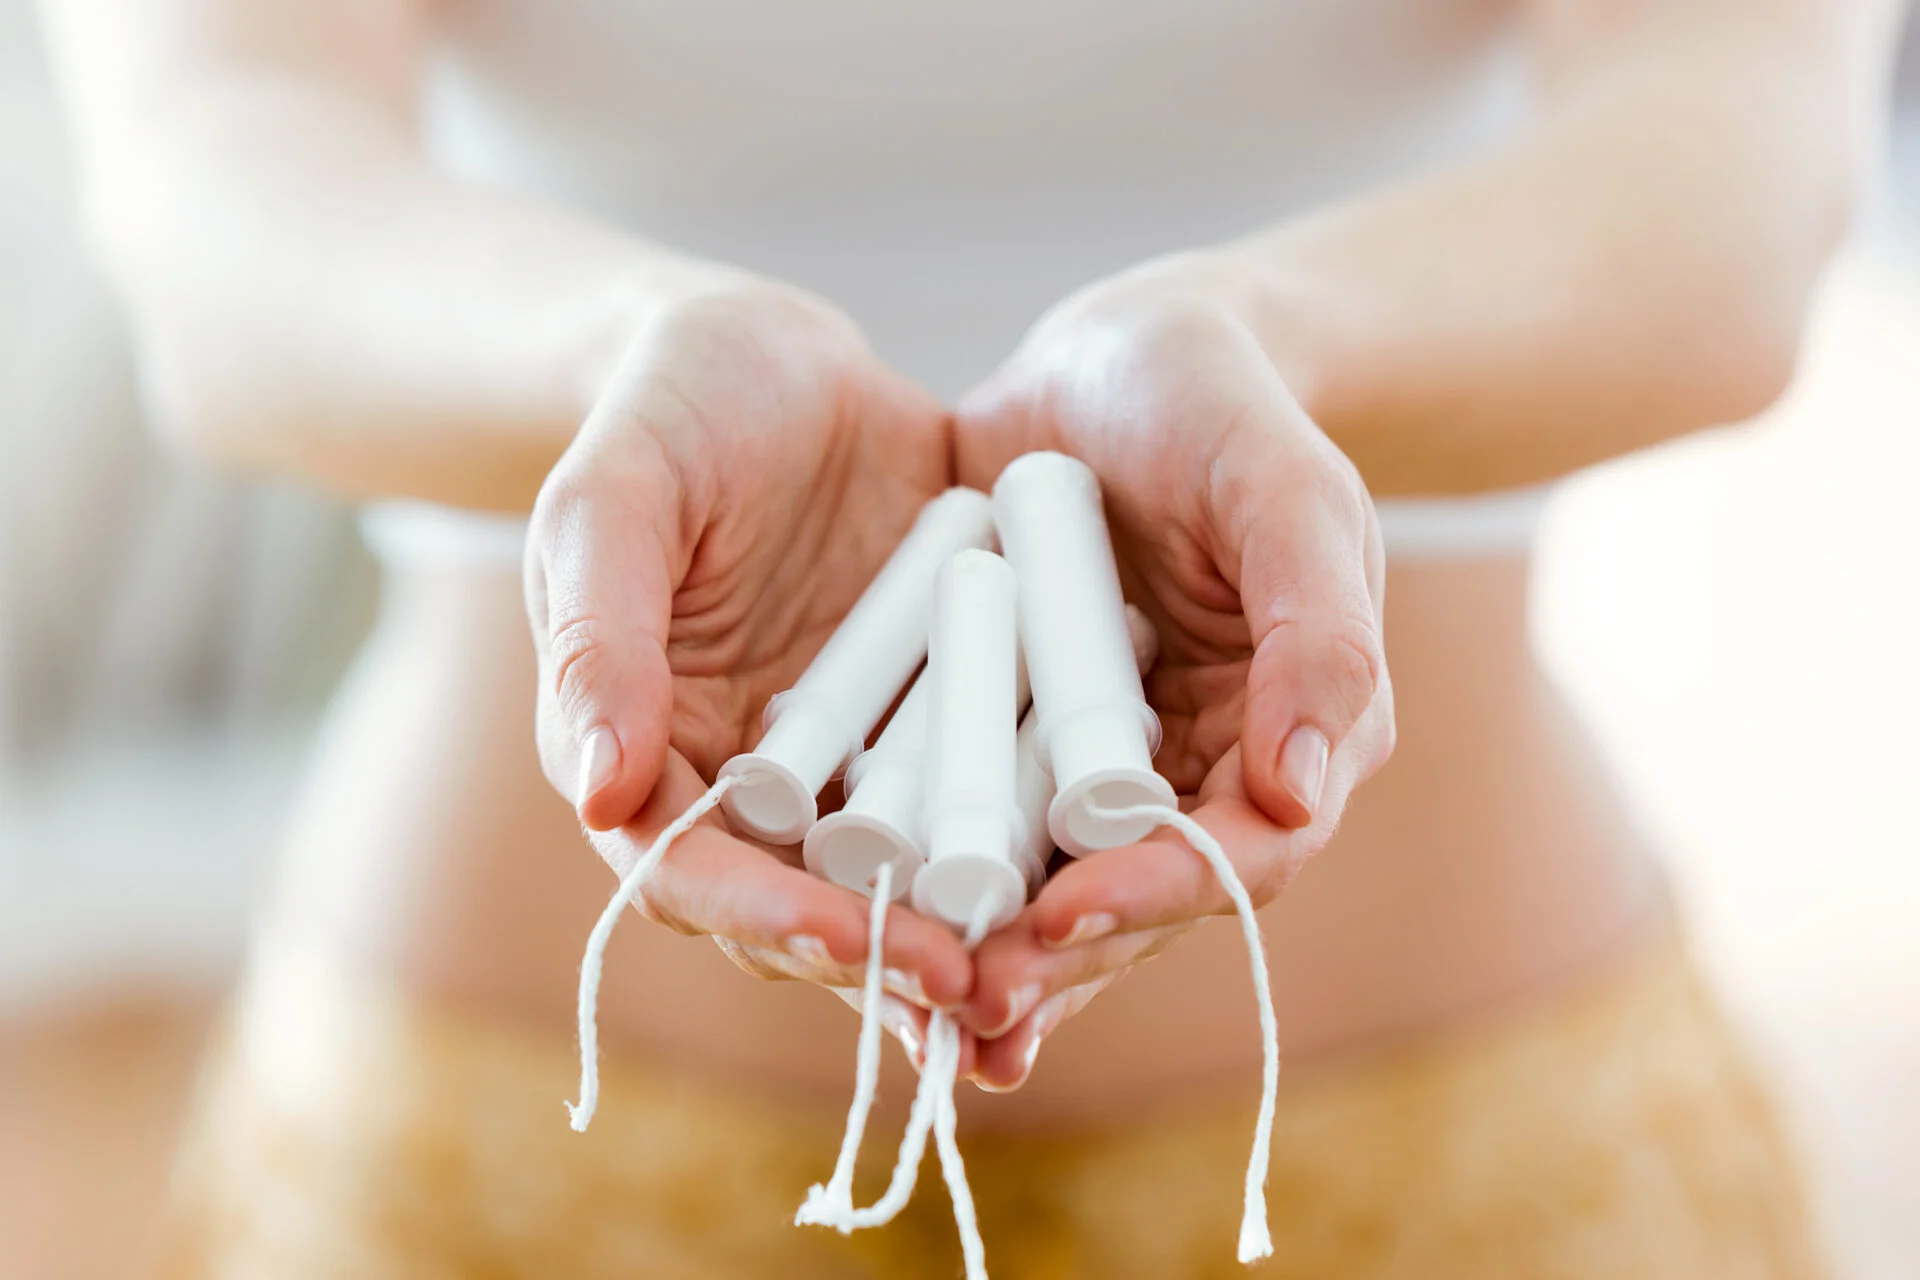 Close-up of the hands of a woman holding some tampons